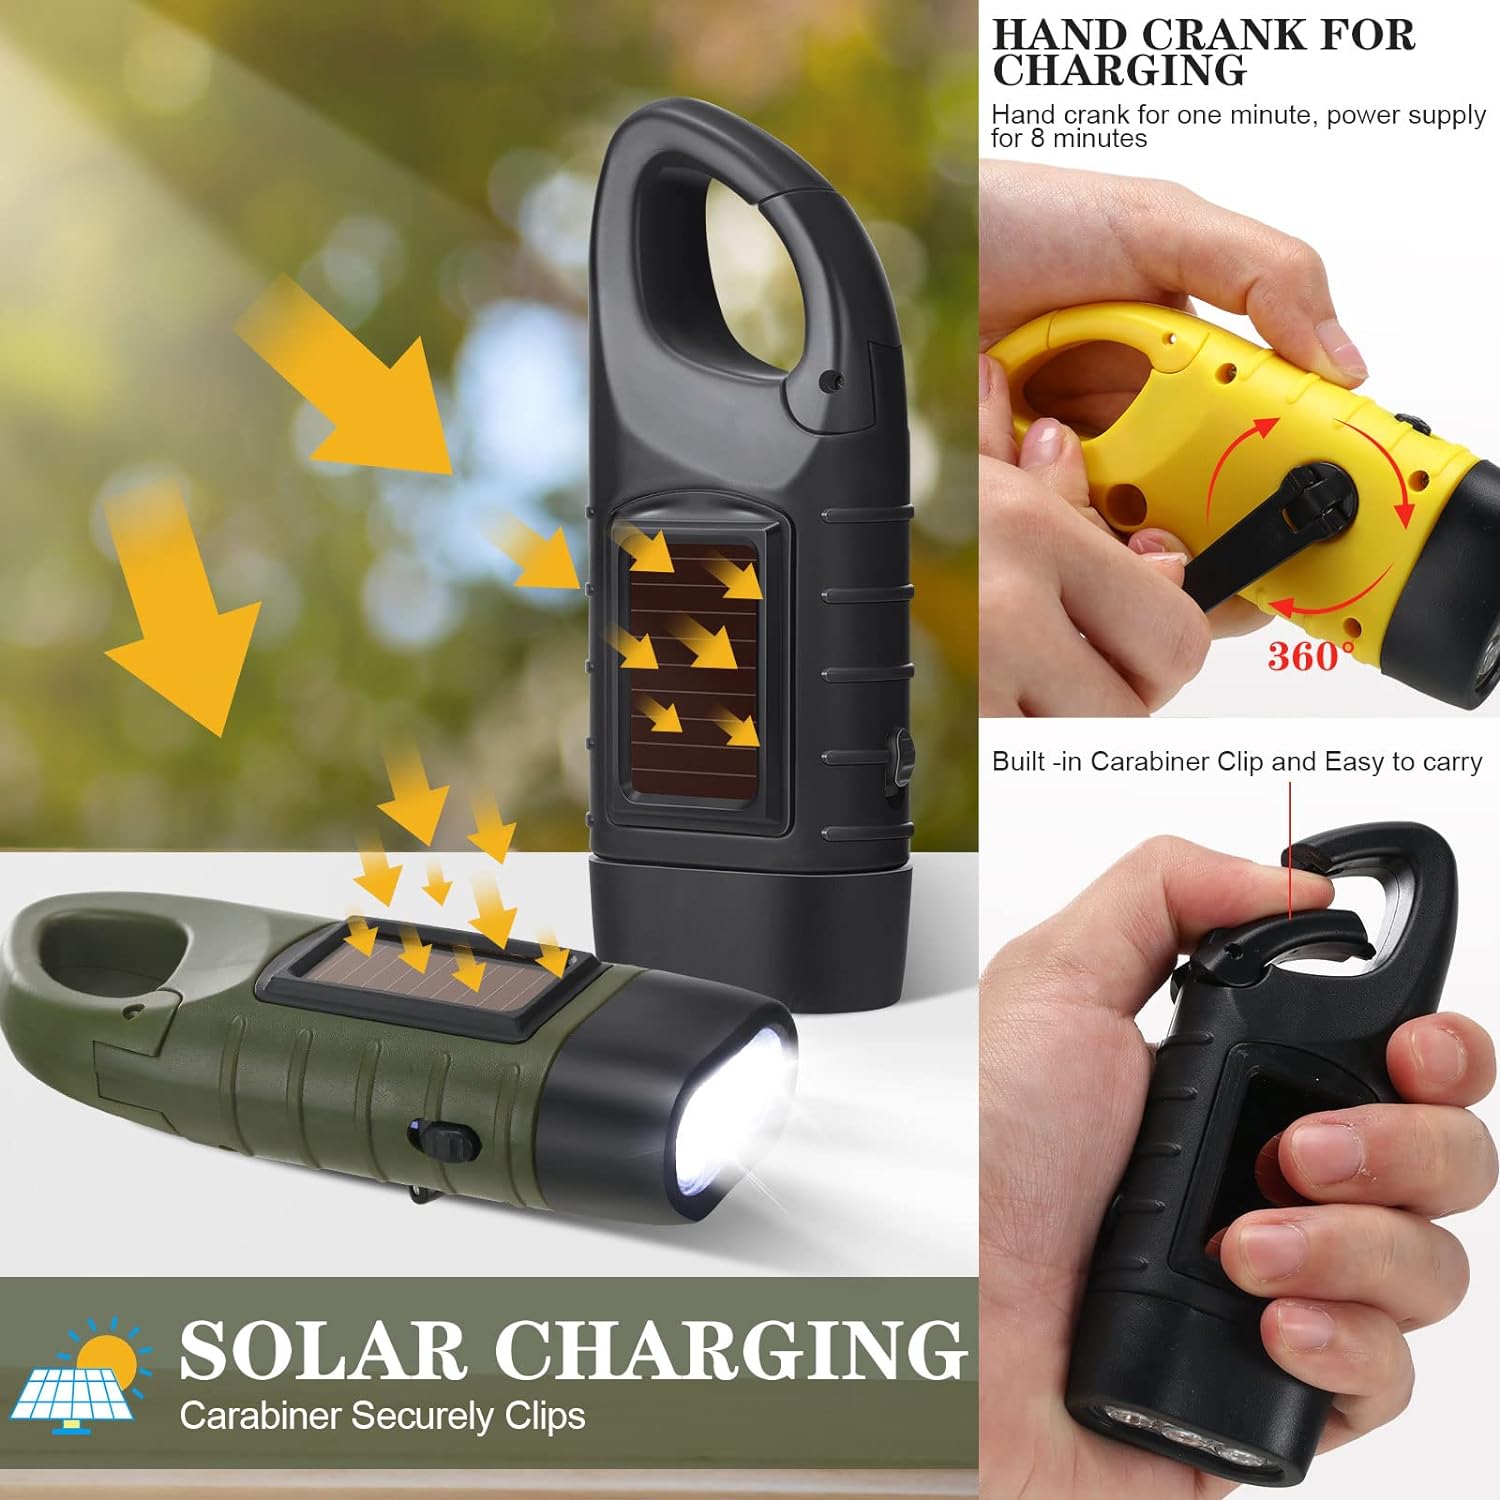 9 Pieces Hand Crank Solar Powered Flashlights, Emergency Rechargeable LED Flashlight Survival Flashlight Gear Self Powered Charging Torch for Outdoor Sports Hiking Camping, Green Yellow Black